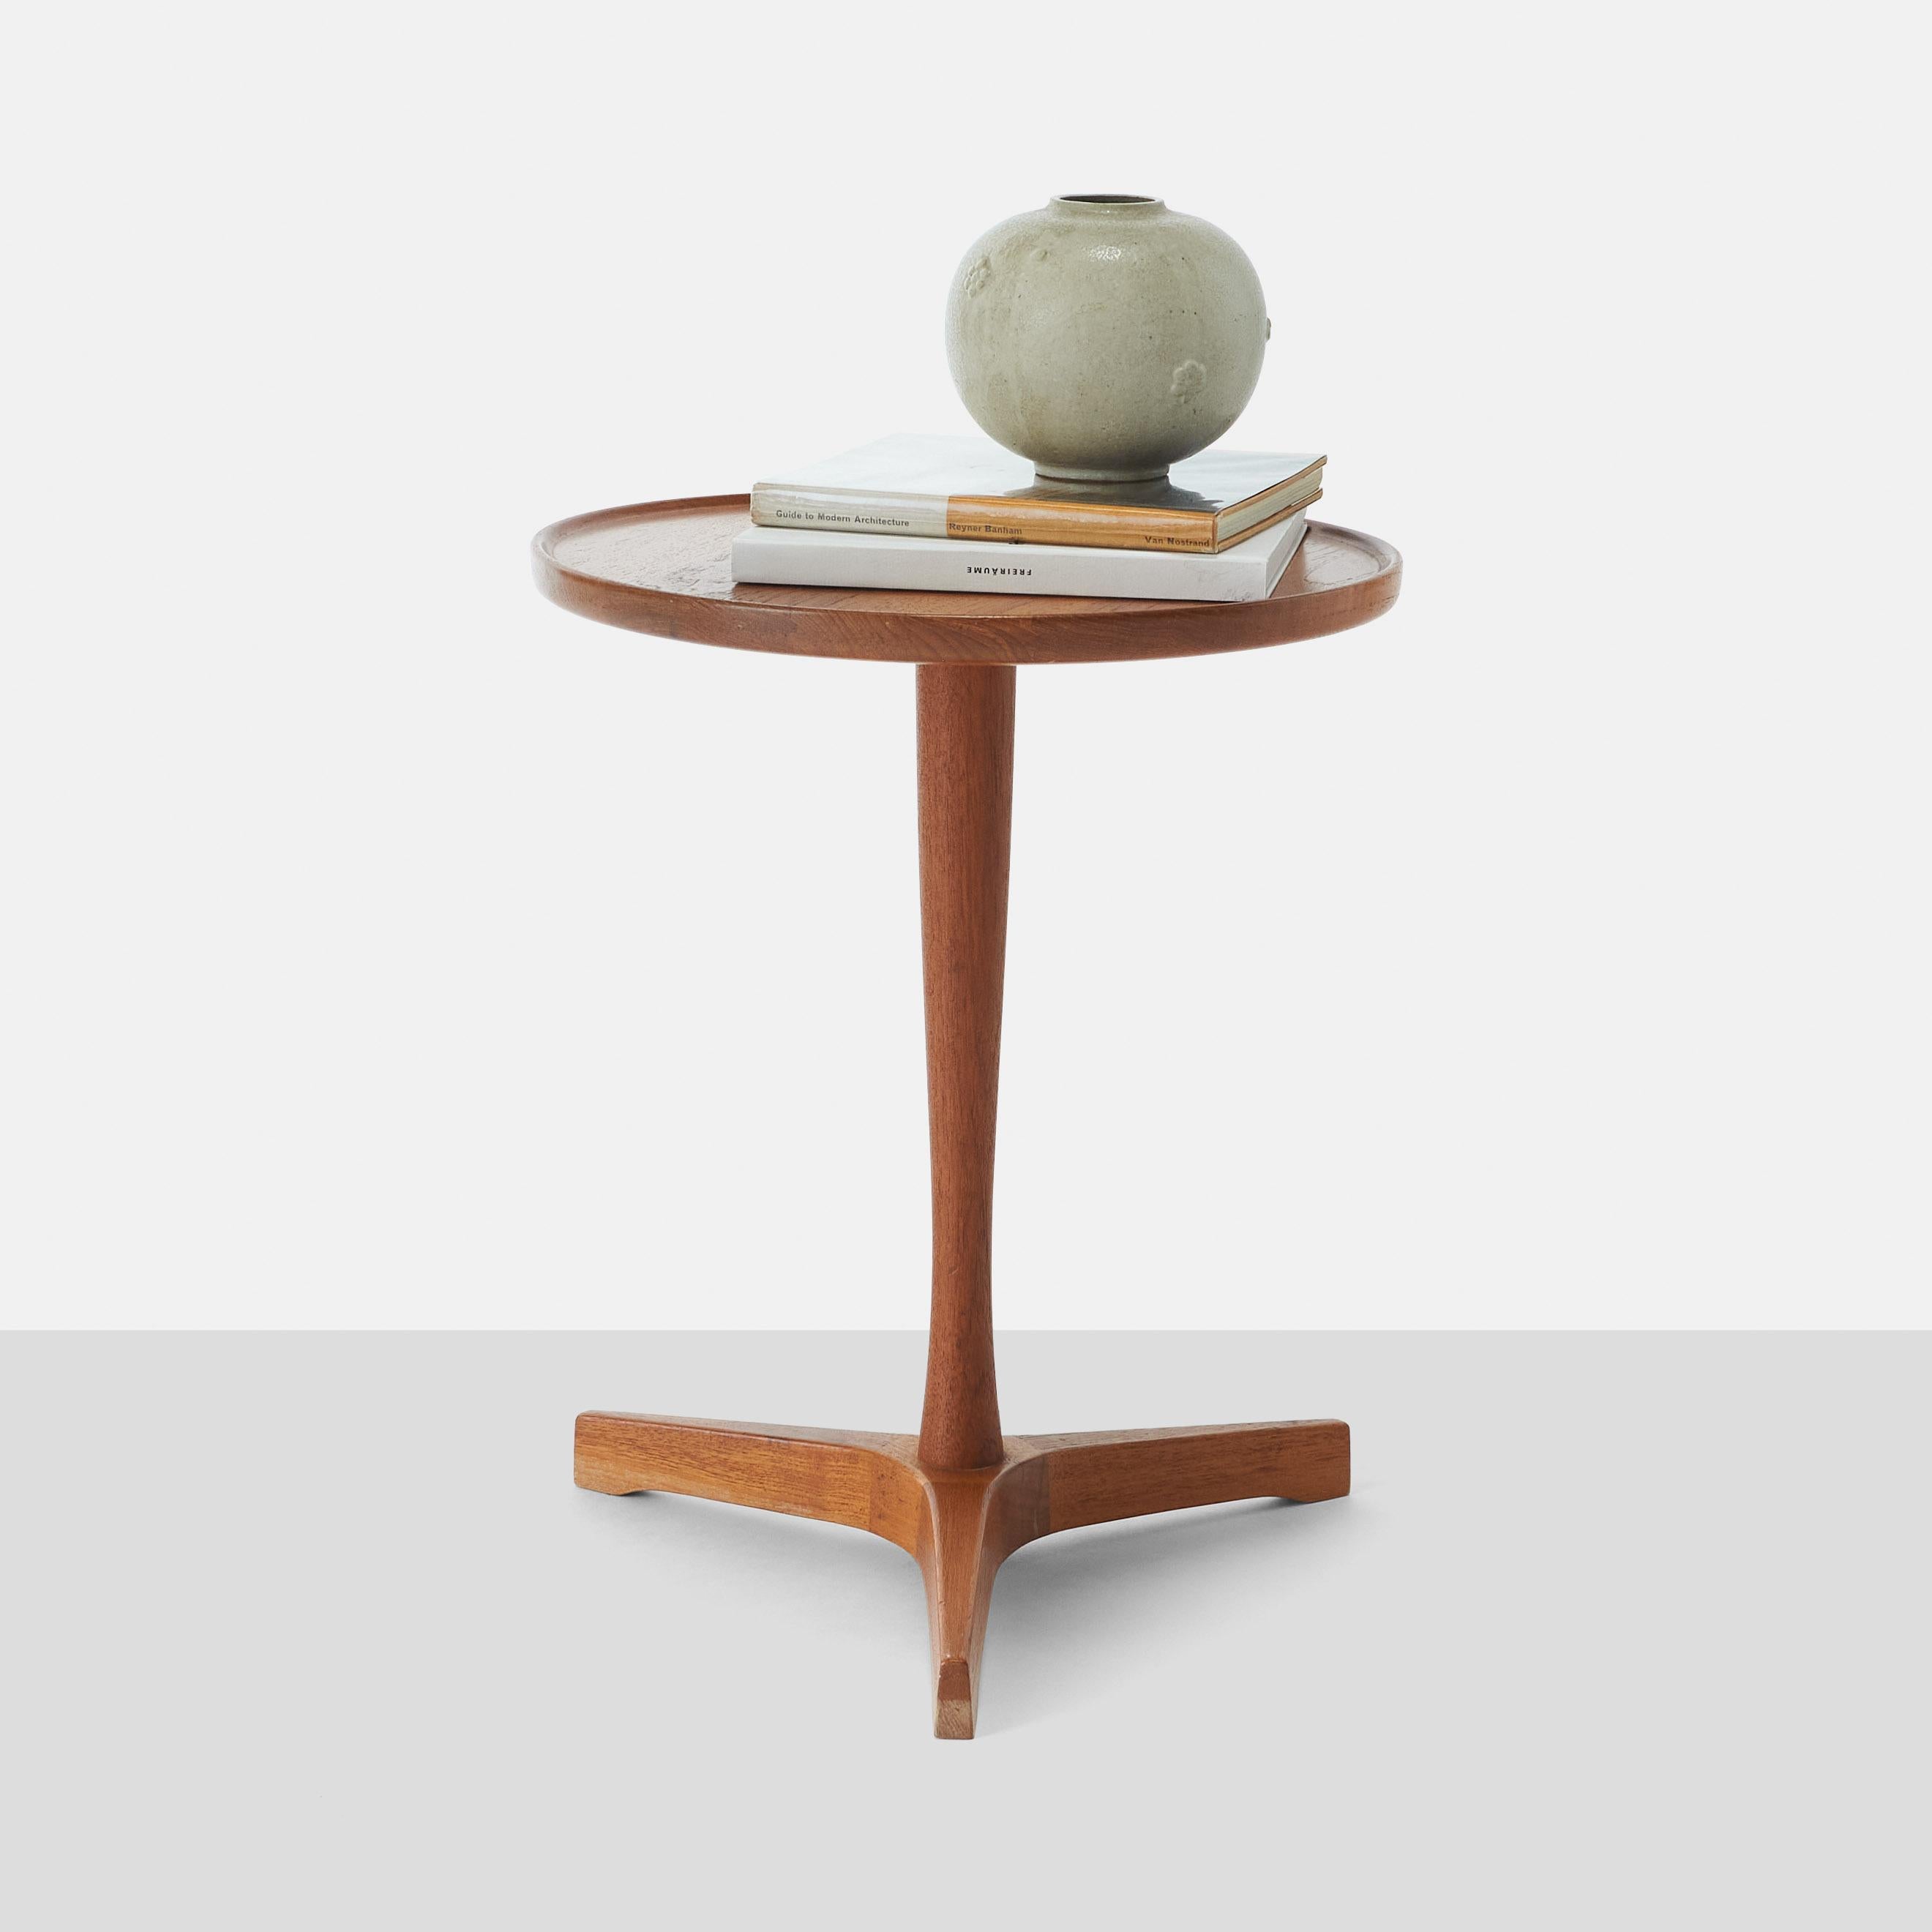 A vintage Scandinavian Modern round side table in teakwood with a veneered top and tripod base. With maker's mark 